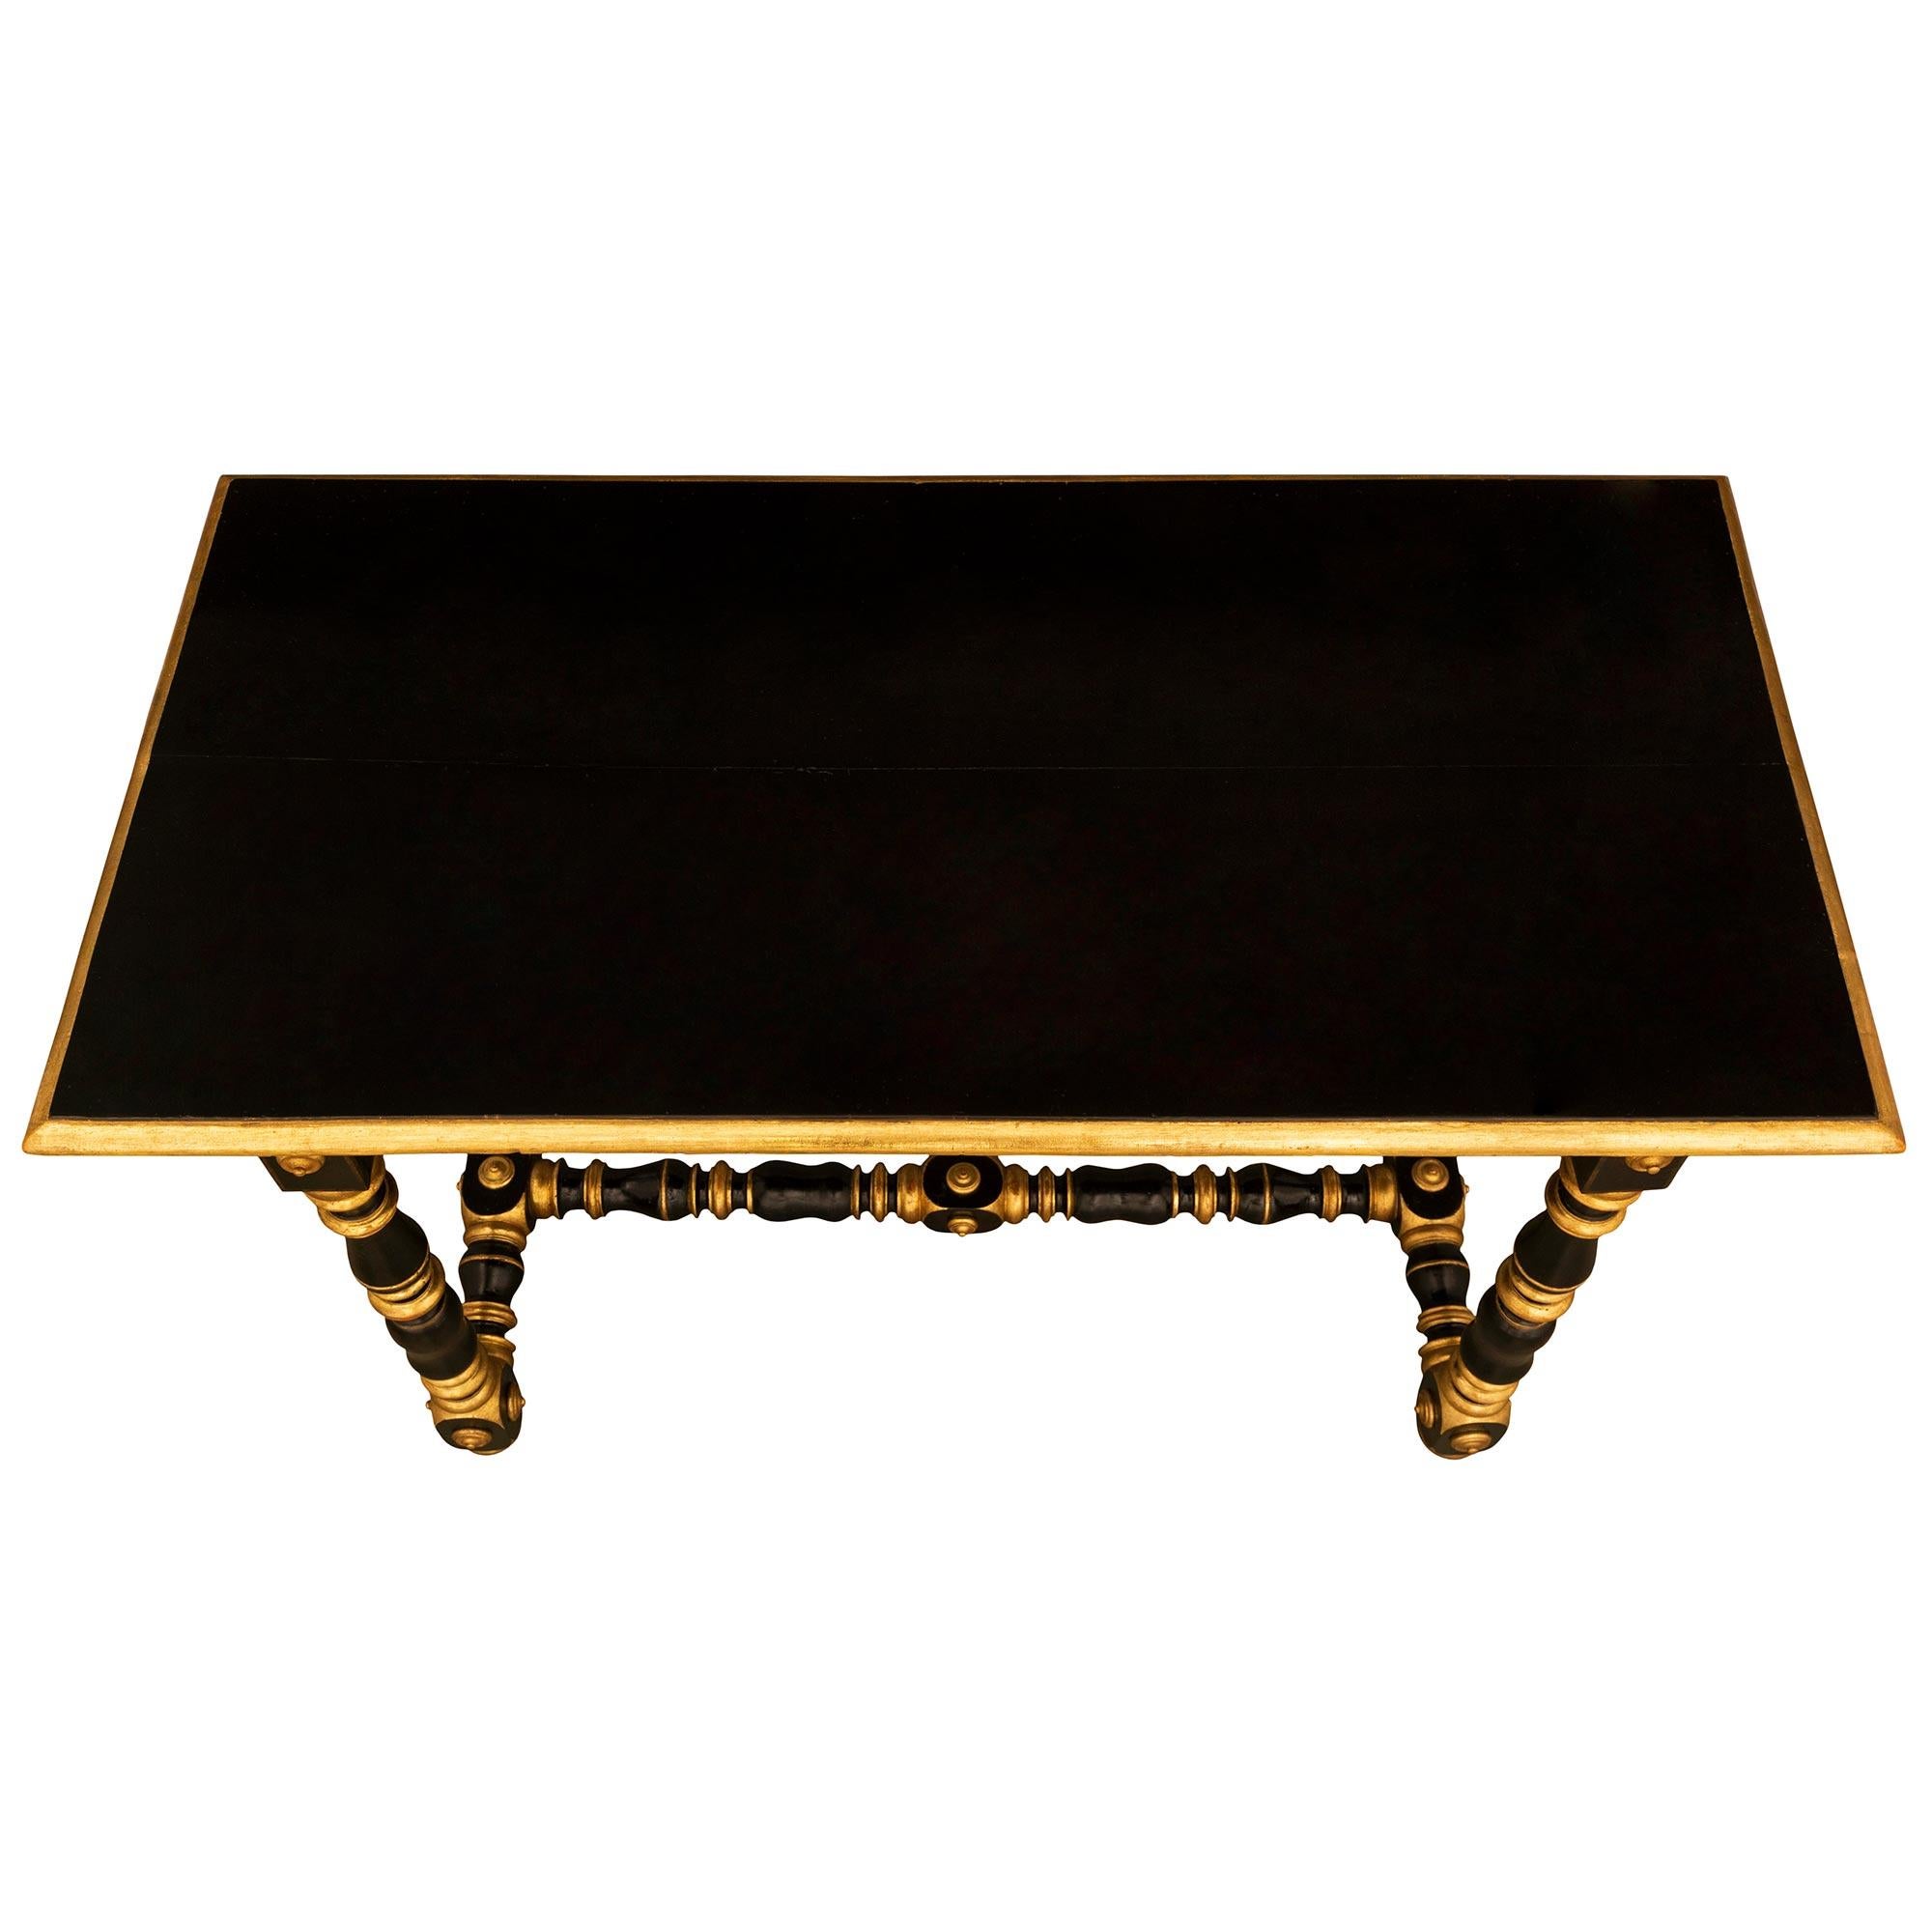 A beautiful and most unique Italian early 18th century Louis XIV period Tuscan st. ebonized Fruitwood and giltwood side/center table. The rectangular table is raised by exceptional turned legs with most decorative mottled giltwood accents and block